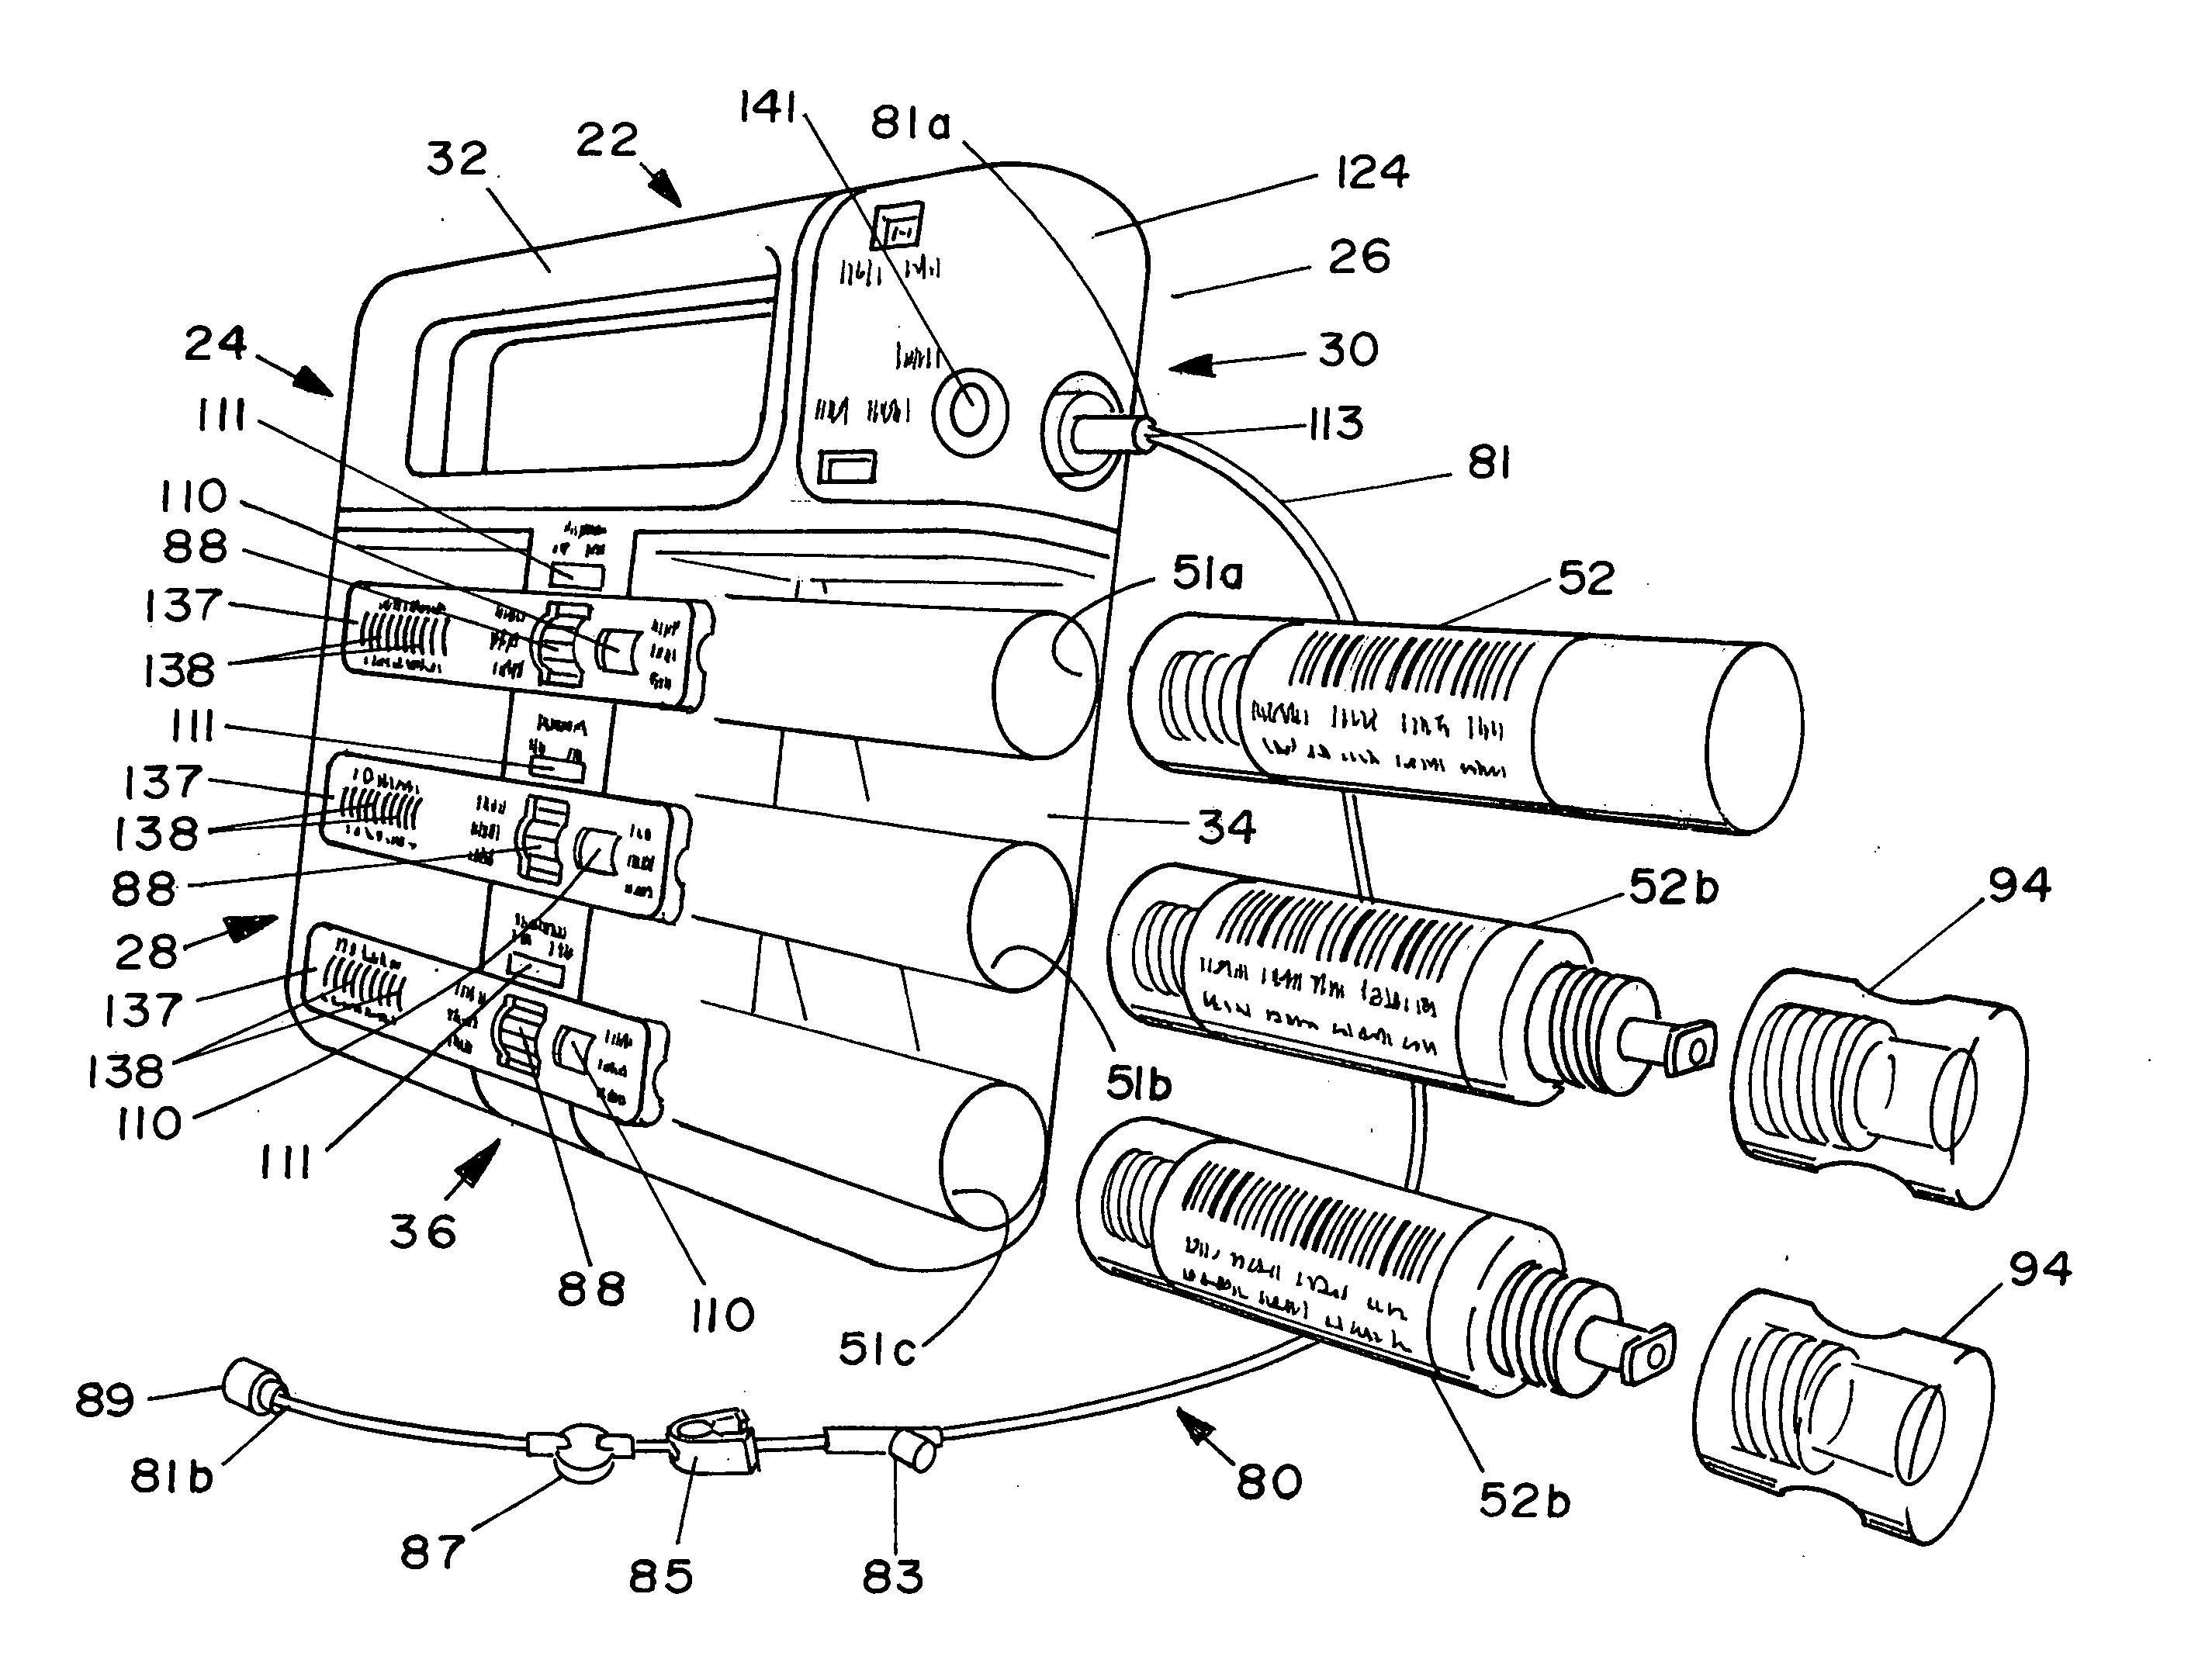 Multichannel fluid delivery device